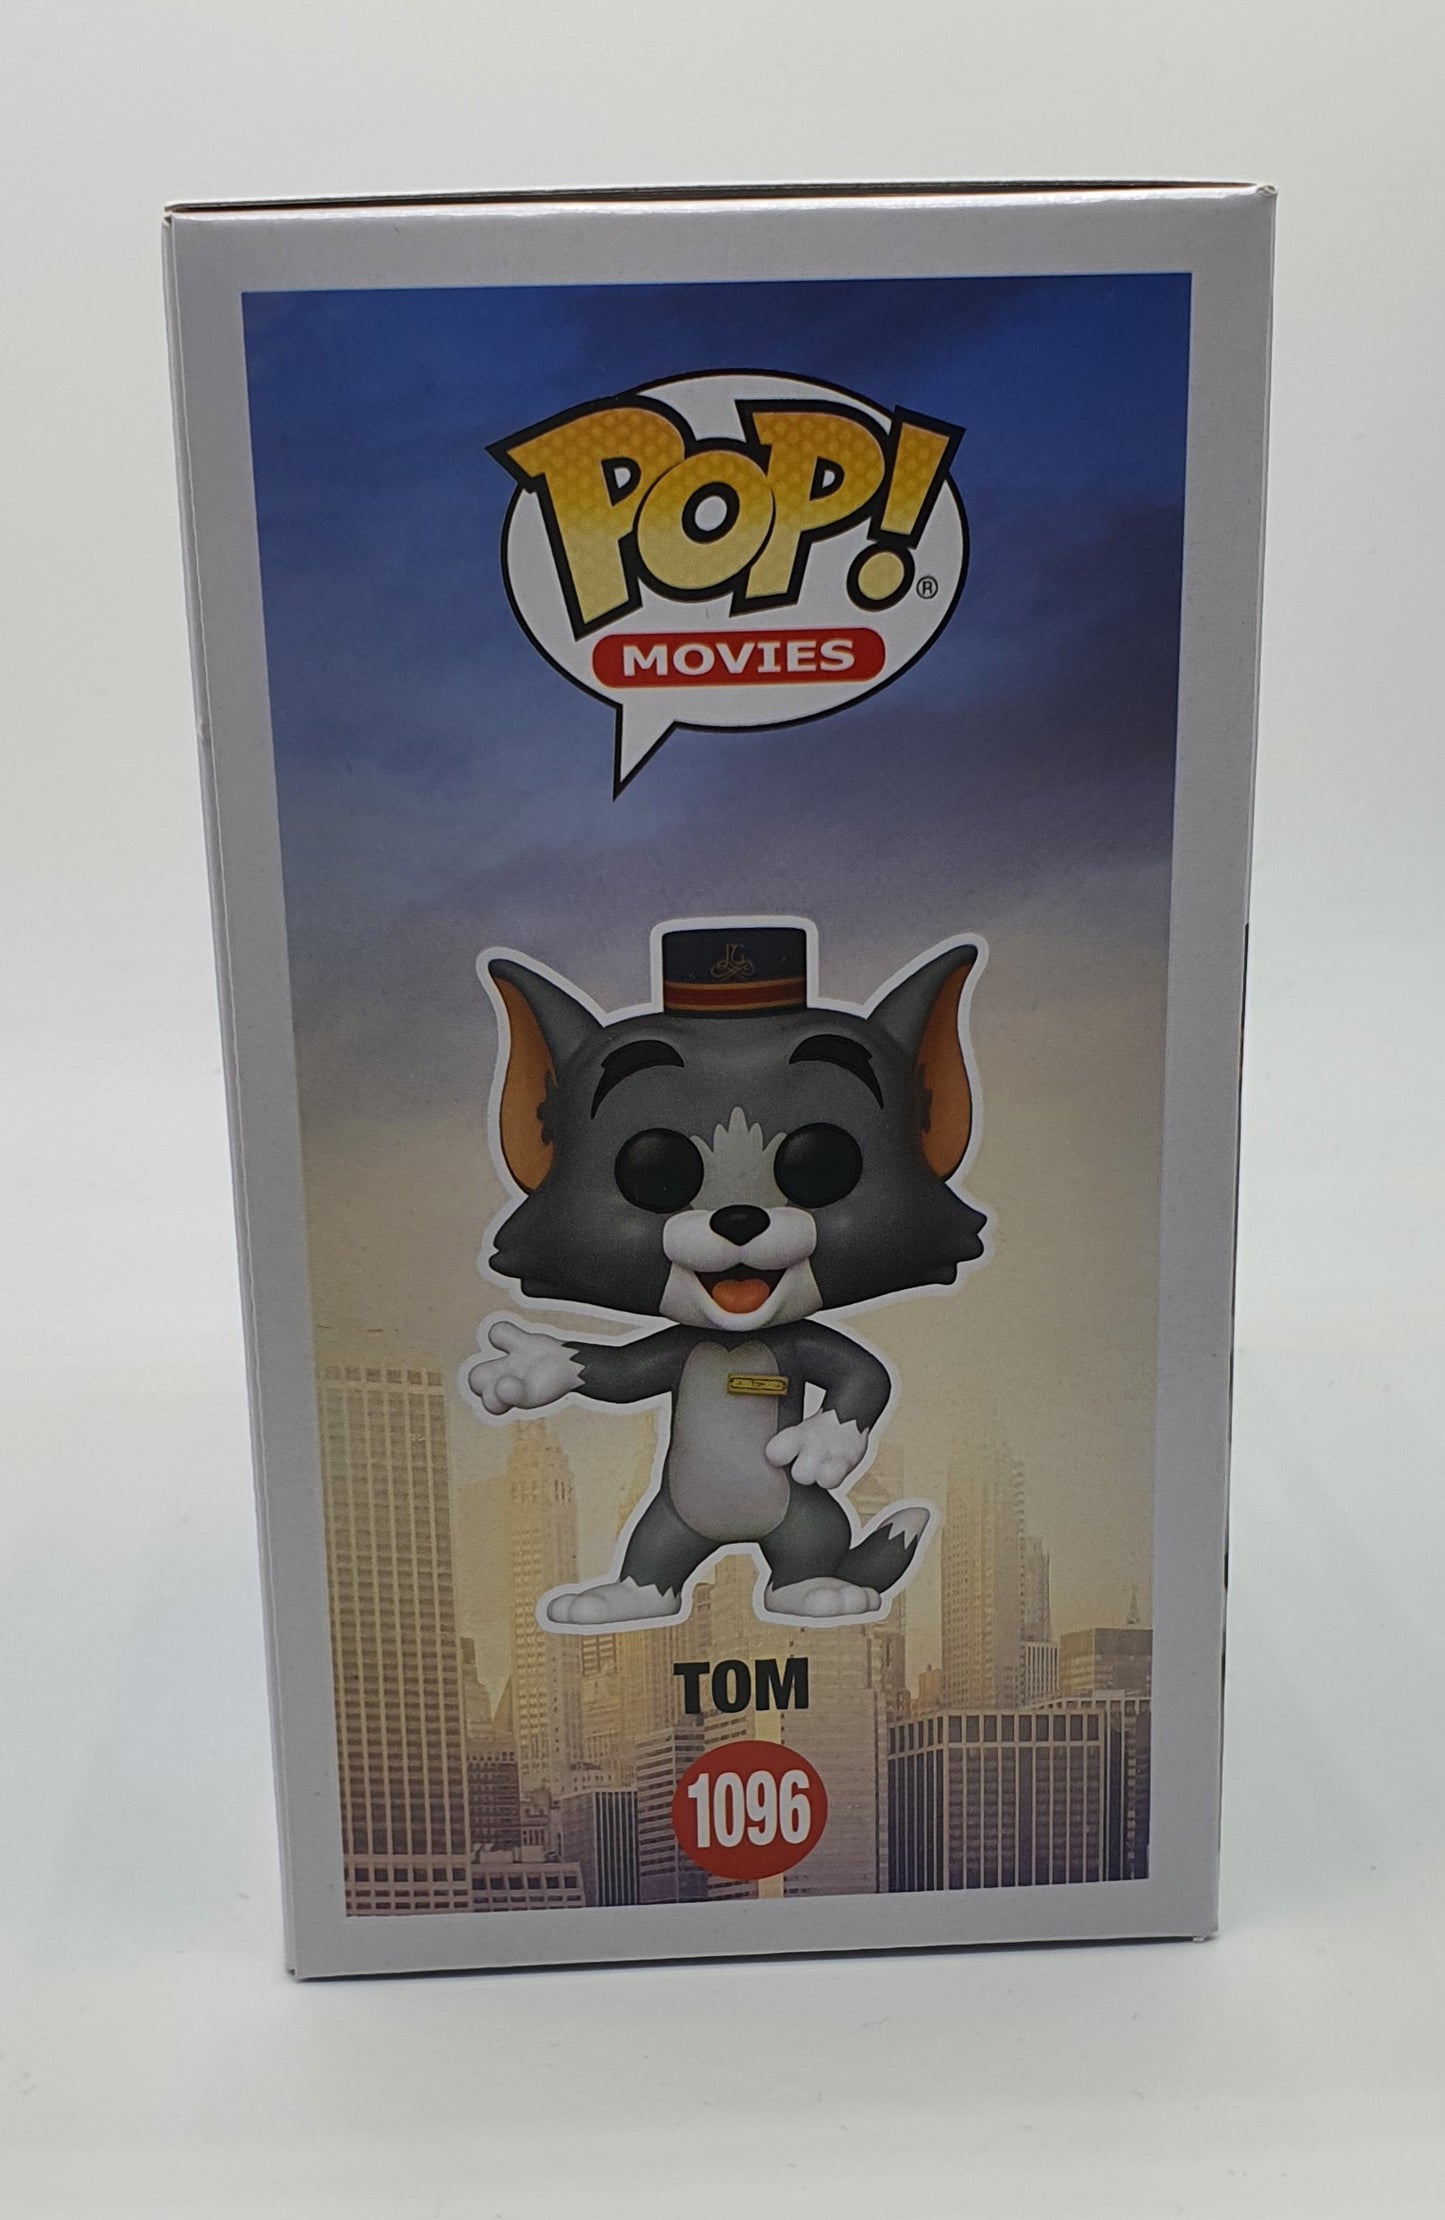 1096 - MOVIES - TOM AND JERRY - TOM